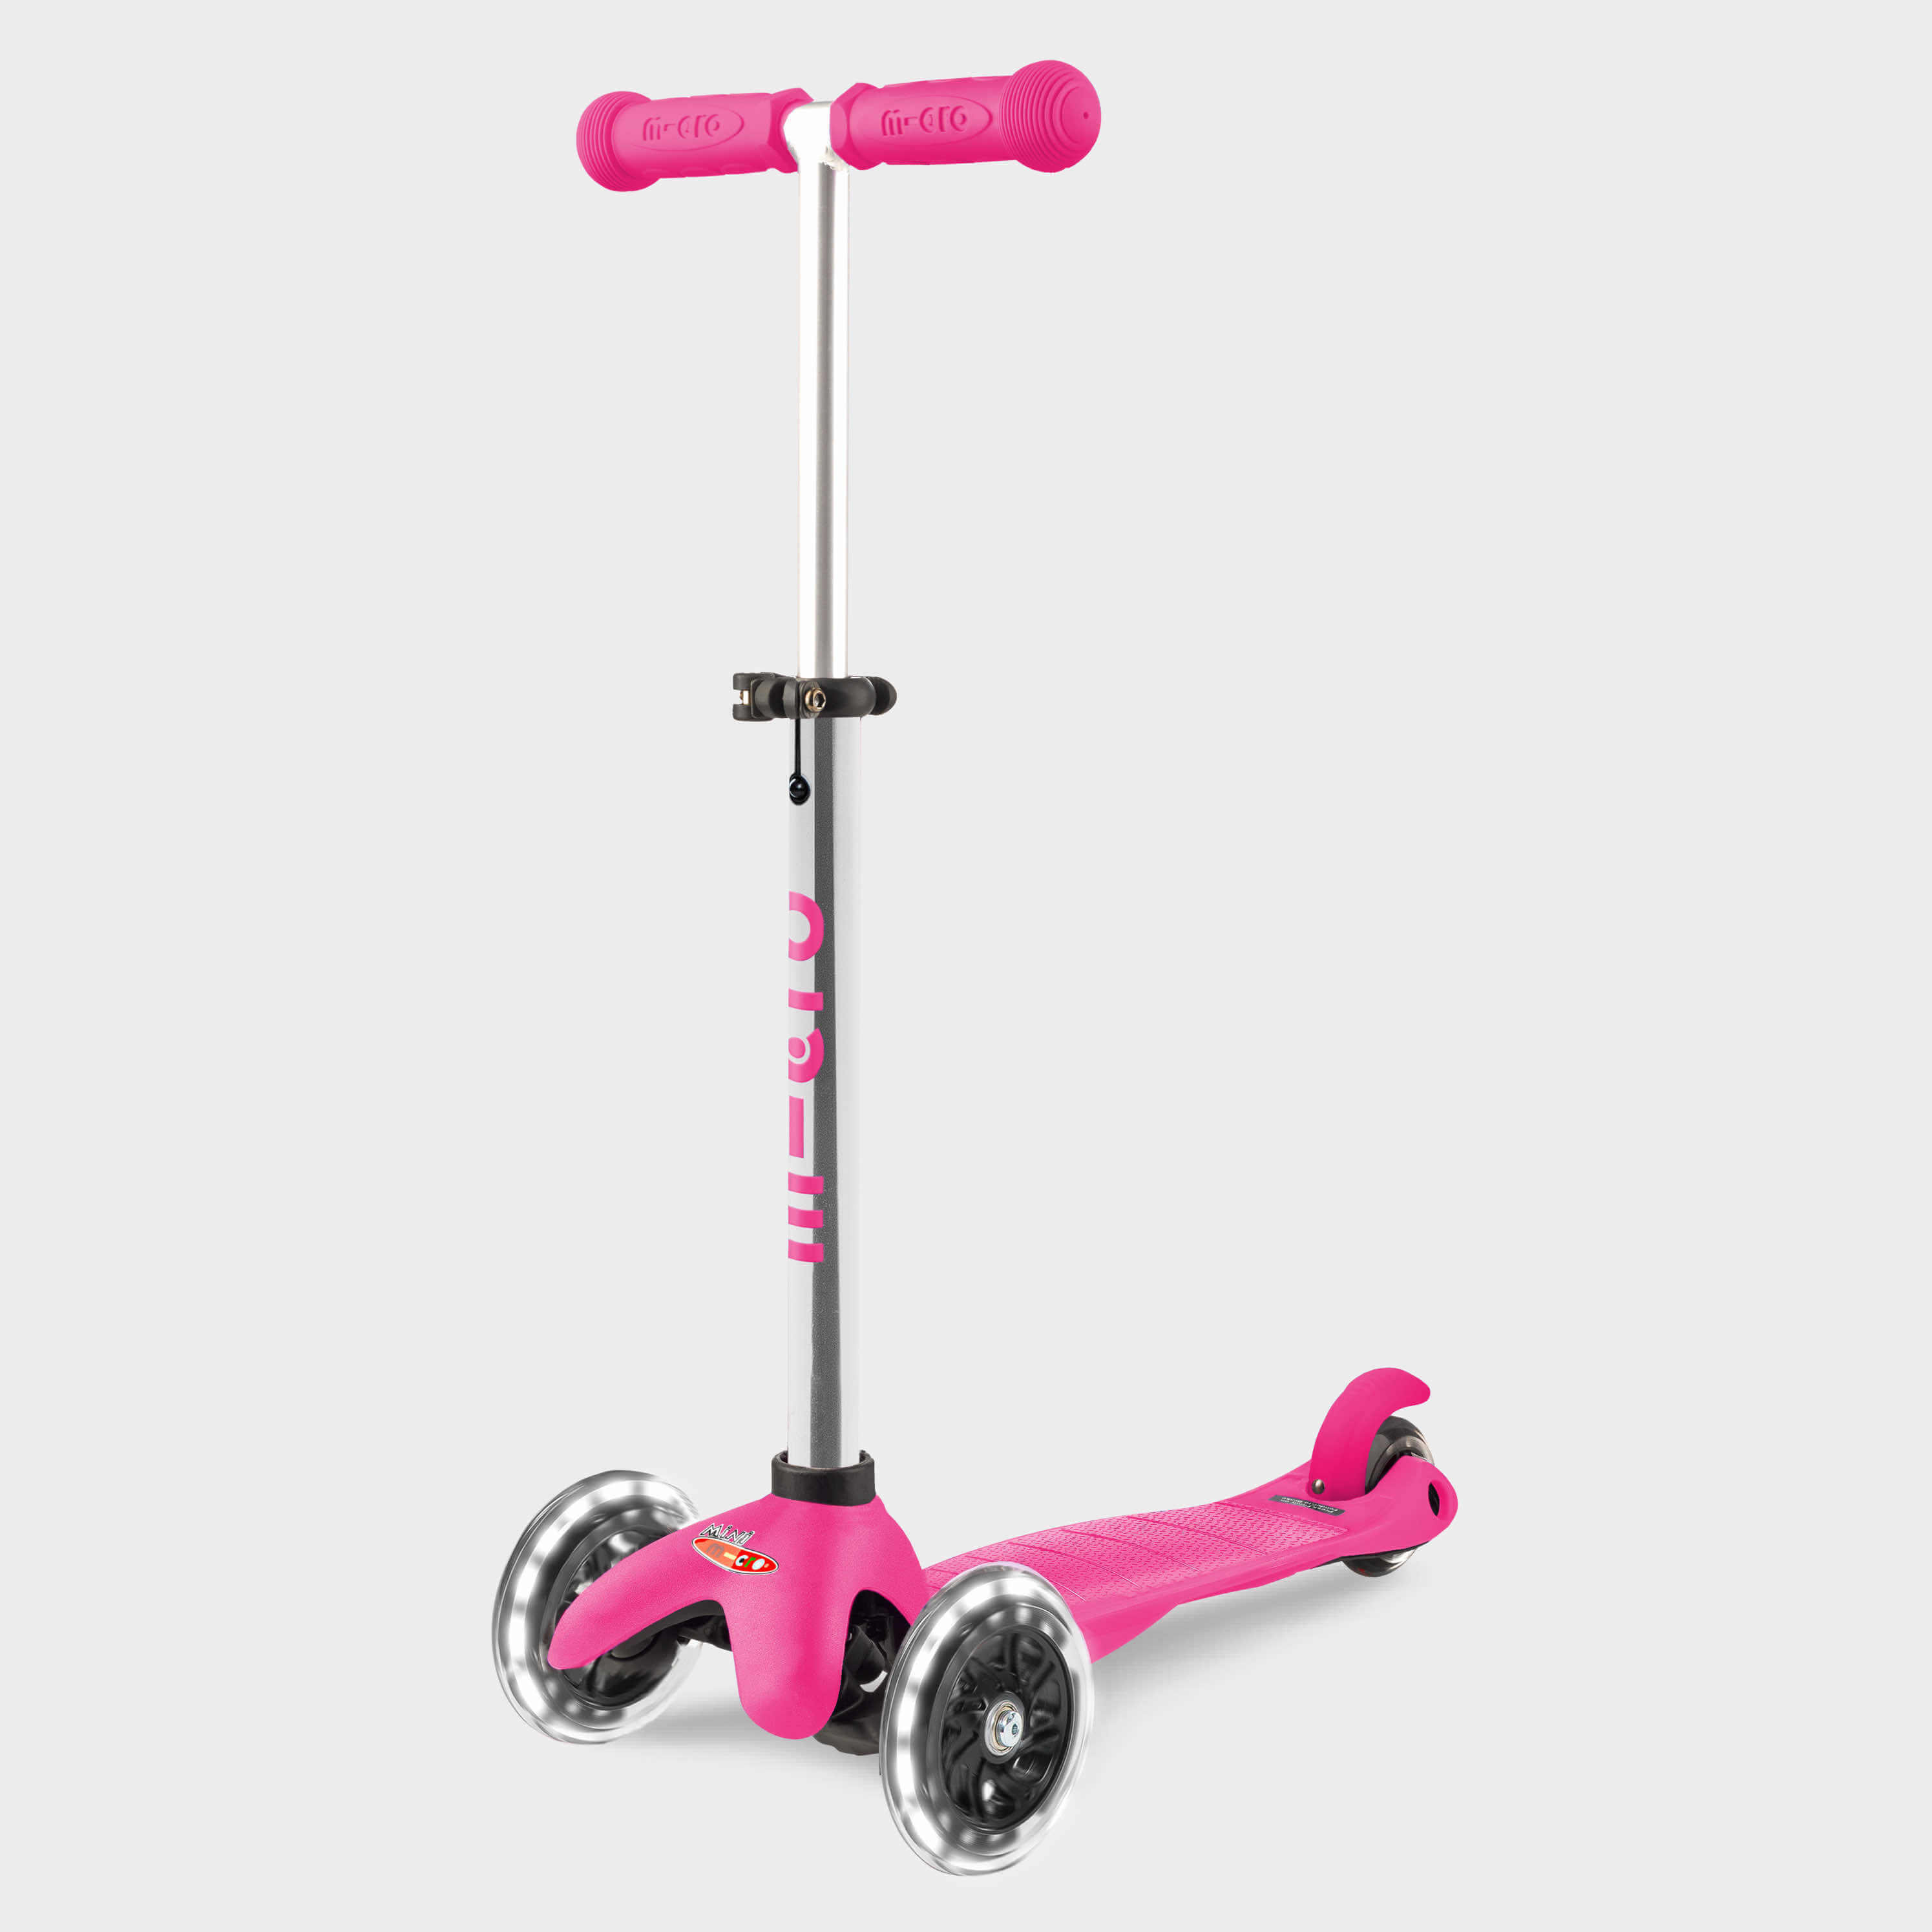 MICRO Mini Scooter - Original with Light up Wheels: Pink